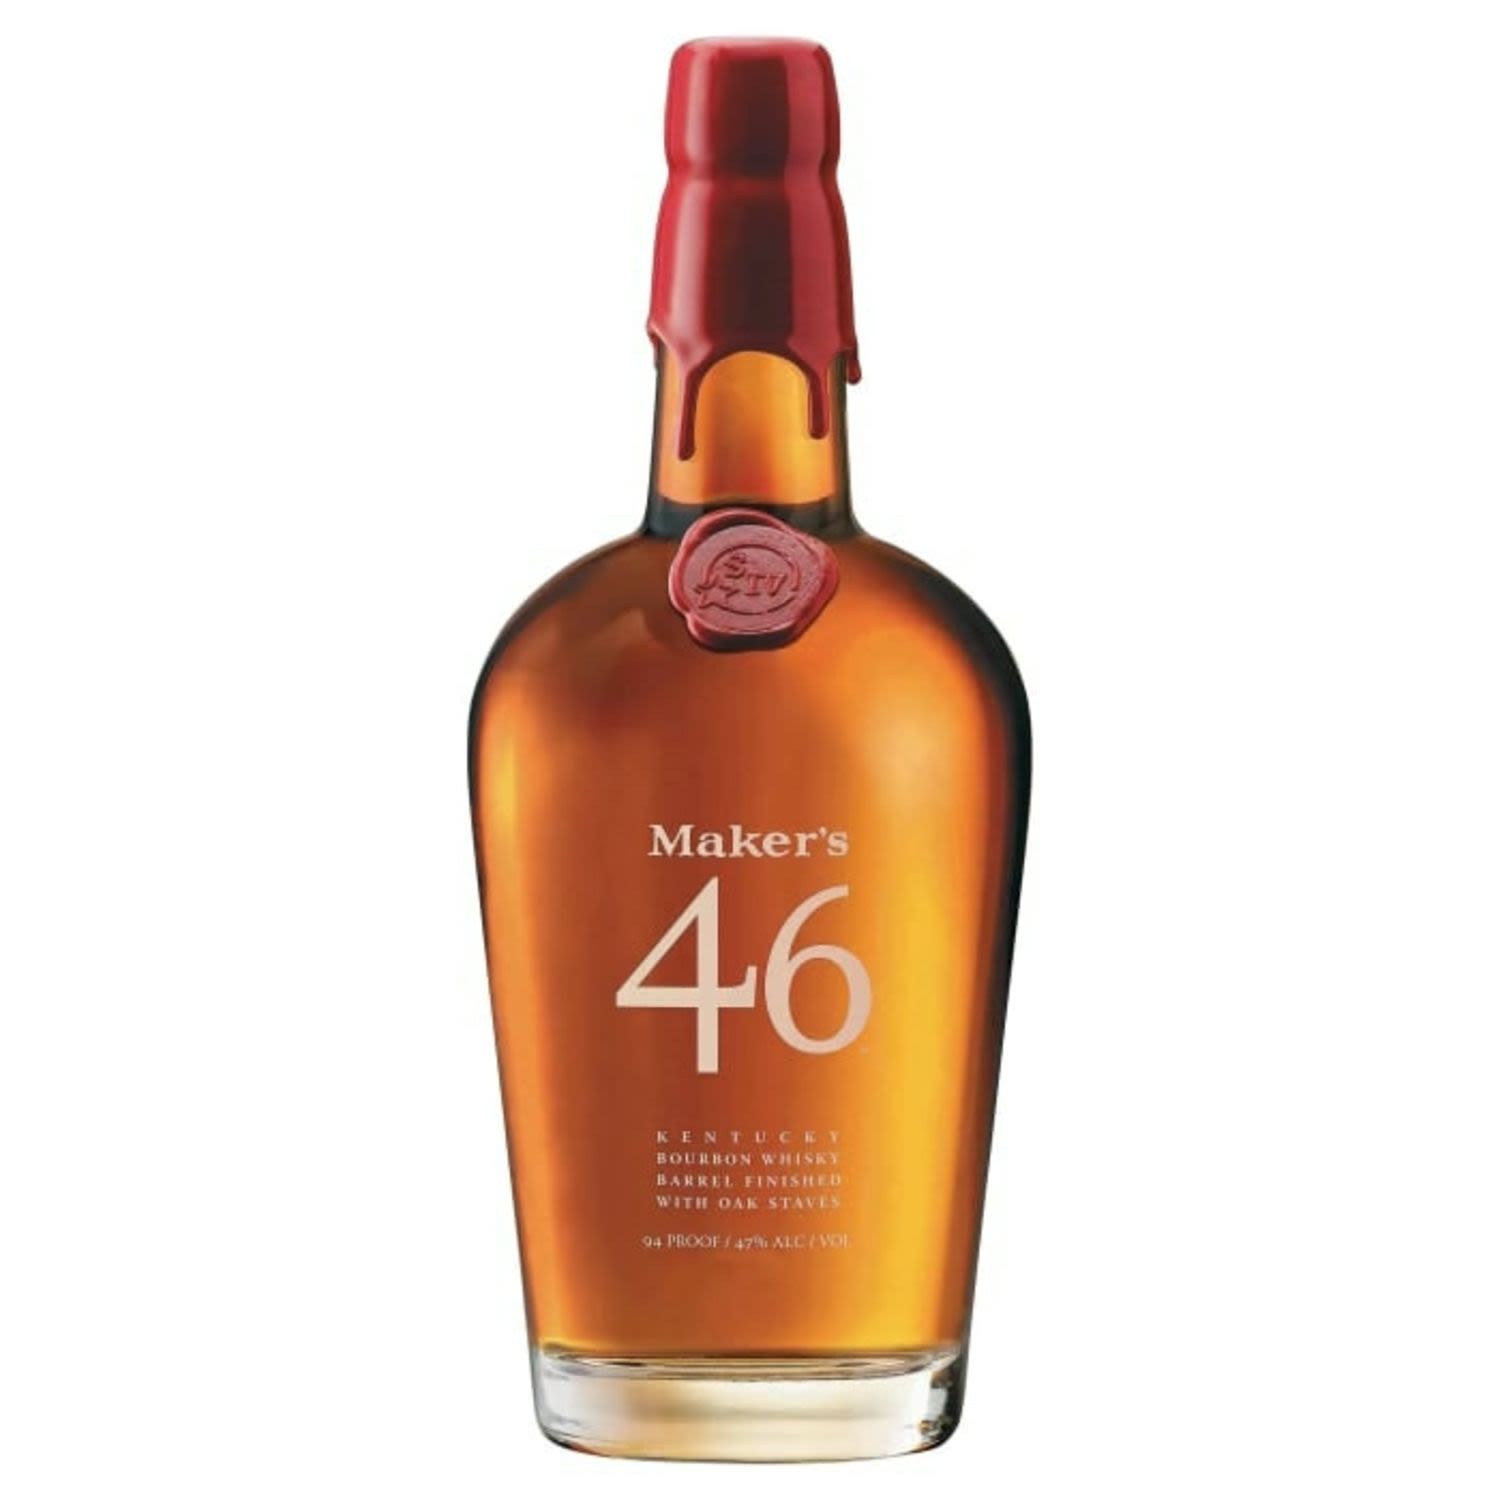 Maker's 46 was created by Bill Samuels, Jr., to amplify the flavours he loves in Maker's Mark. The innovative wood stave finishing process starts with fully matured Maker's Mark at cask strength. We then insert seared virgin French oak staves into the barrel and finish it a bit longer in our limestone cellar. The result is Maker's 46: bolder and more complex, but without the bitterness typical of longer aged whiskies. Aroma: hints of French oak, caramel and sweetness. Taste: very intense flavours, wood blending nicely with complex, rich notes of vanilla and caramel with a smooth and subtle finish.<br /> <br />Alcohol Volume: 47.00%<br /><br />Pack Format: Bottle<br /><br />Standard Drinks: 26</br /><br />Pack Type: Bottle<br /><br />Country of Origin: USA<br />